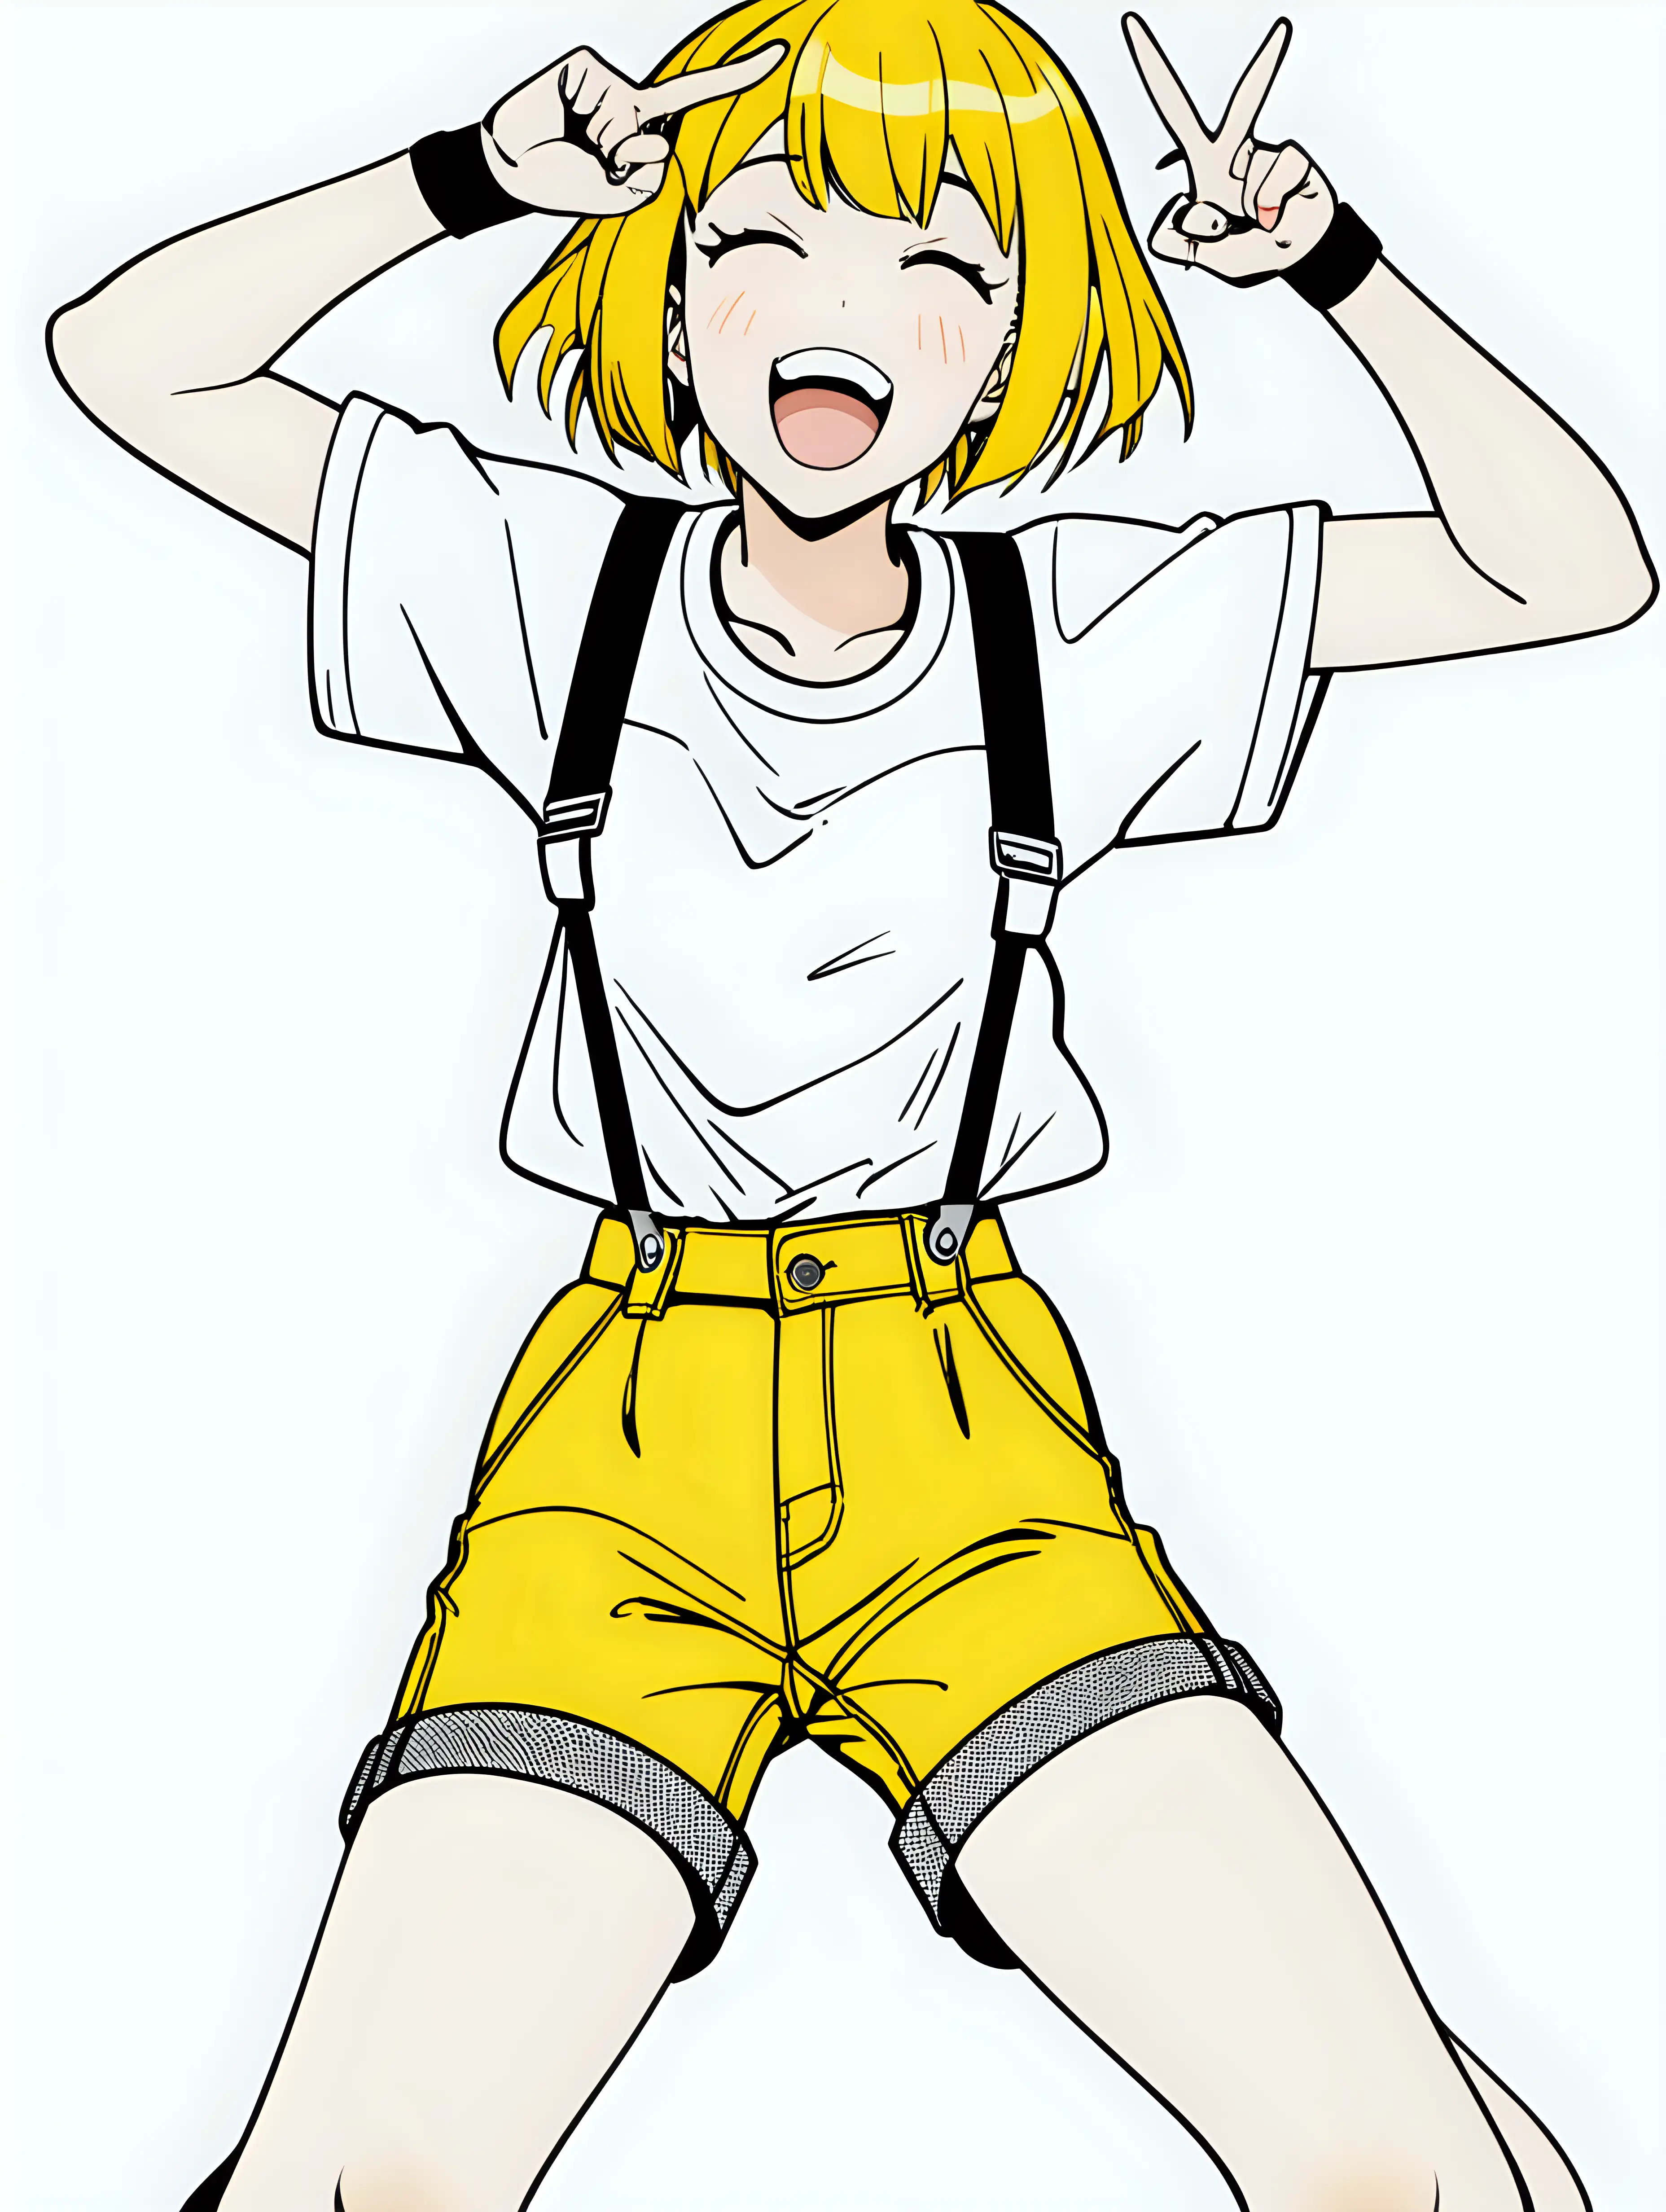 anime adult girl hero short white tshirt sexy midriff wearing suspenders short yellow hair white background posterized halftone yellow black white 3 color minimal design full body yellow shorts black boots yelling and holding up hand with two fingers smiling eyes closed